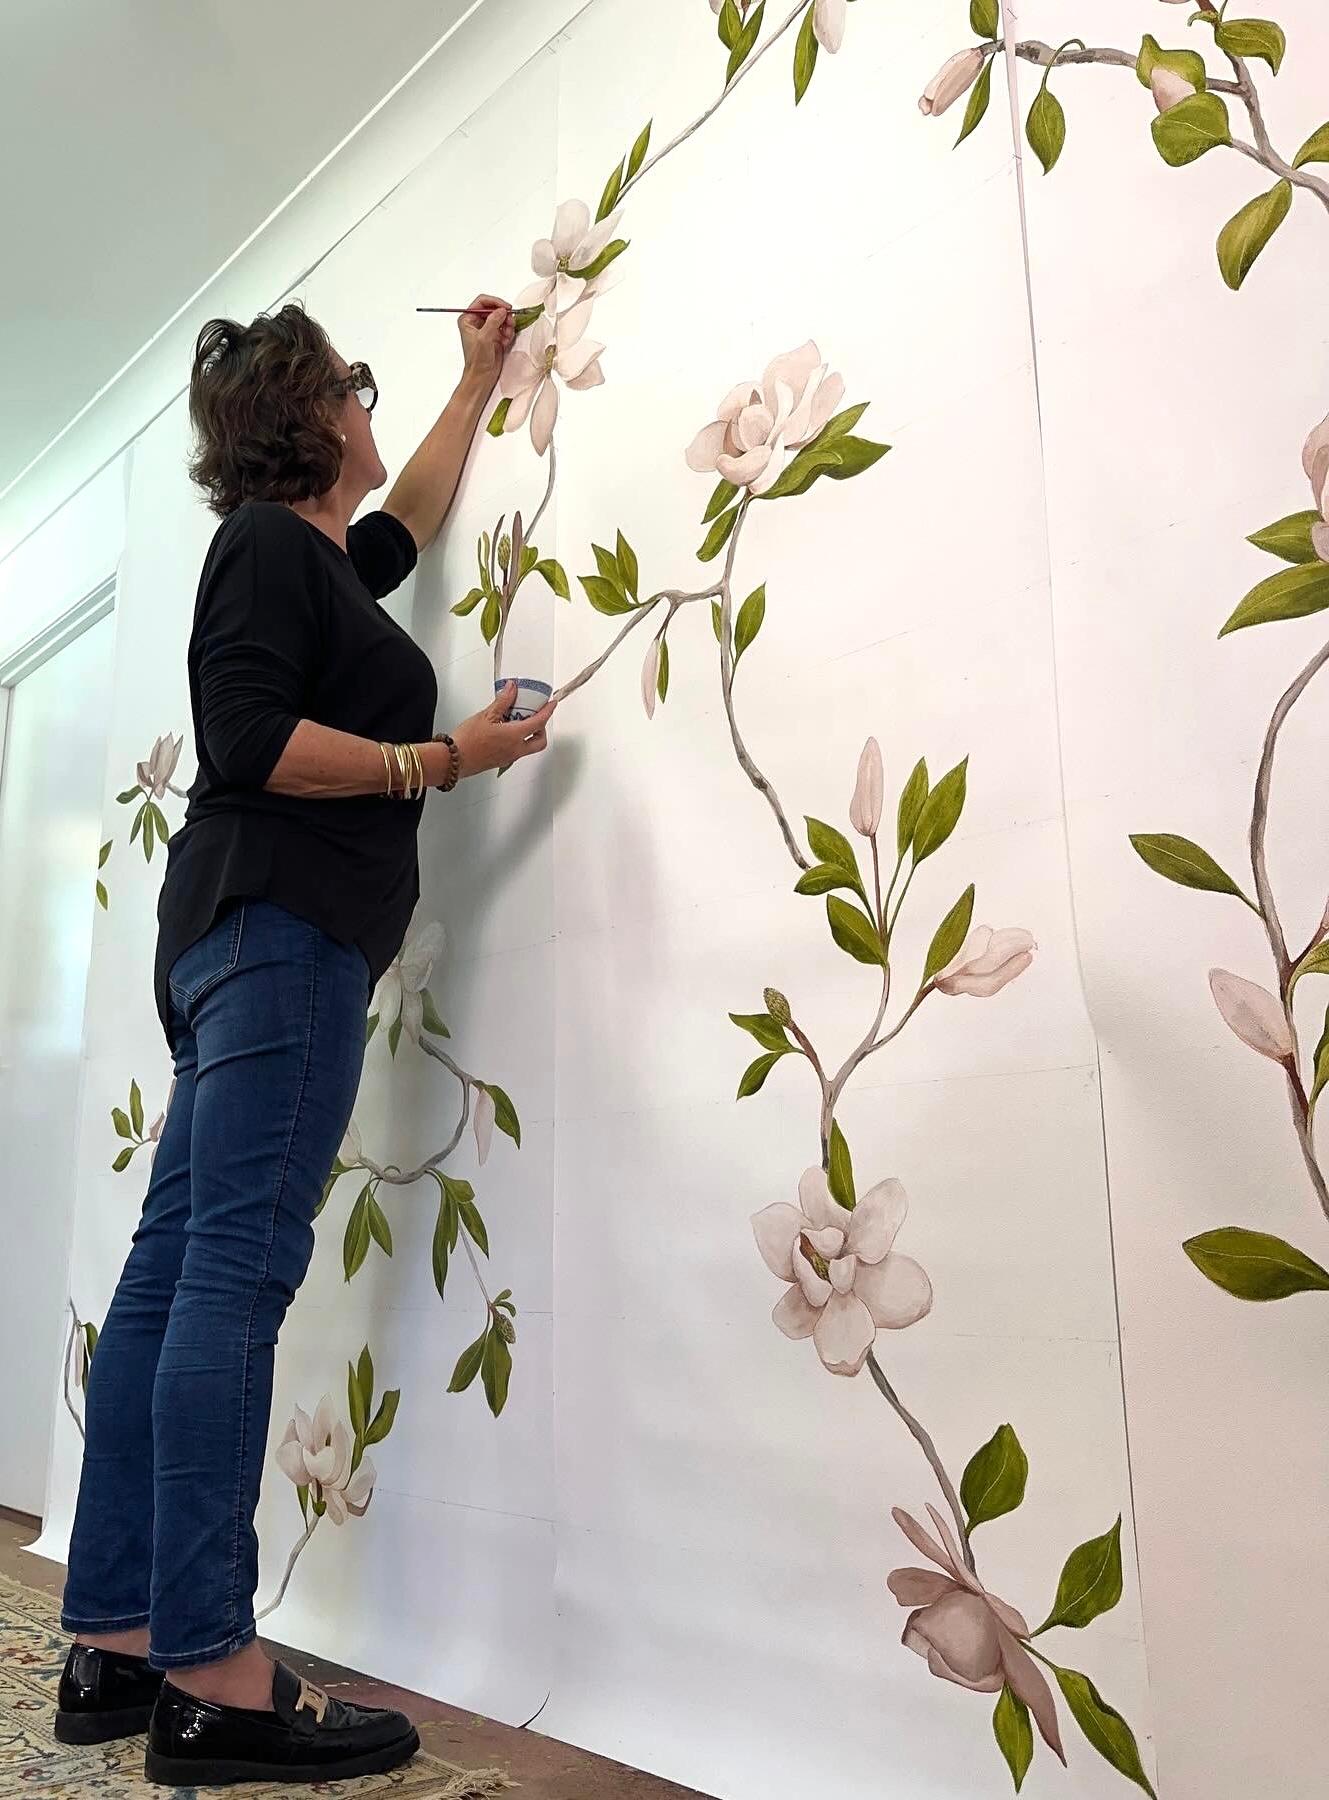 The Magnolia design is the first in the hand painted wallpaper collection and is representative of its fragile blossoms and woody stems.
Each panel is a work of fine art, painted with meticulous care and expertise by artist Tarn McLean in the Ocre